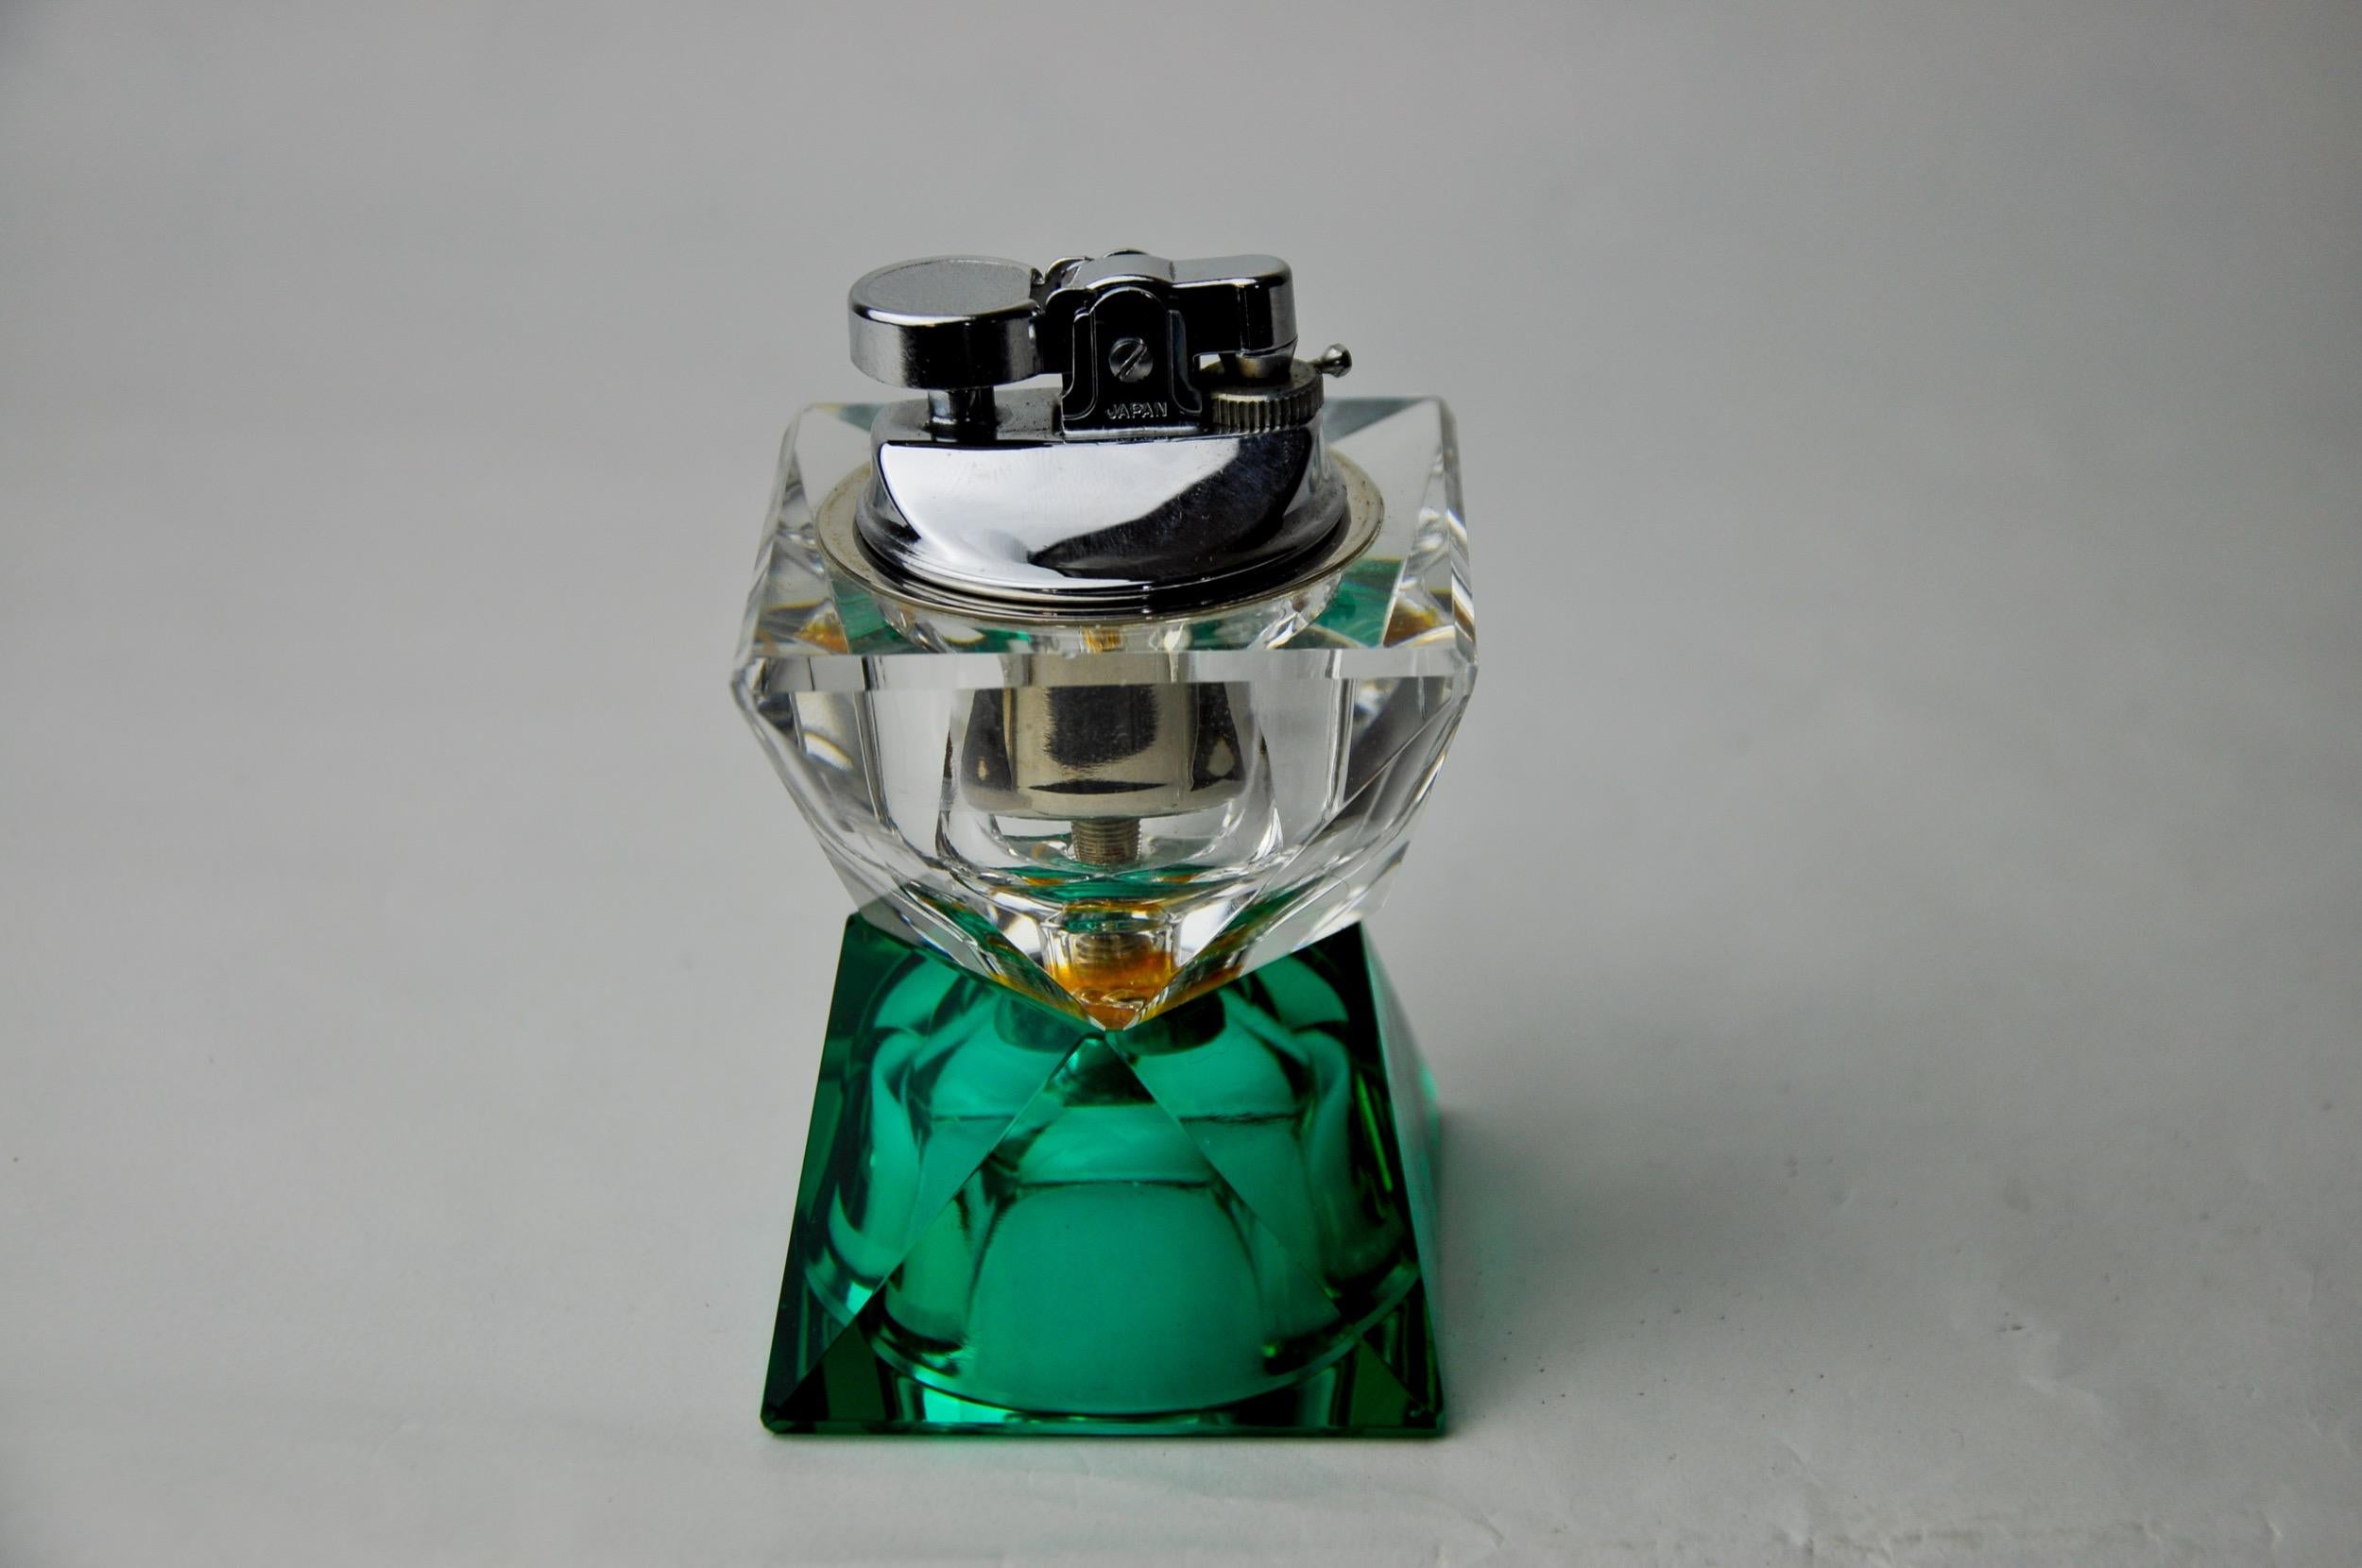 Rare green faceted lighter designated and manufactured for seguso in murano in the 1970s. Superb craftsmanship of glass by venetian master glassmakers. Beautiful object of collection and decoration. Perfect state of conservation without lack or